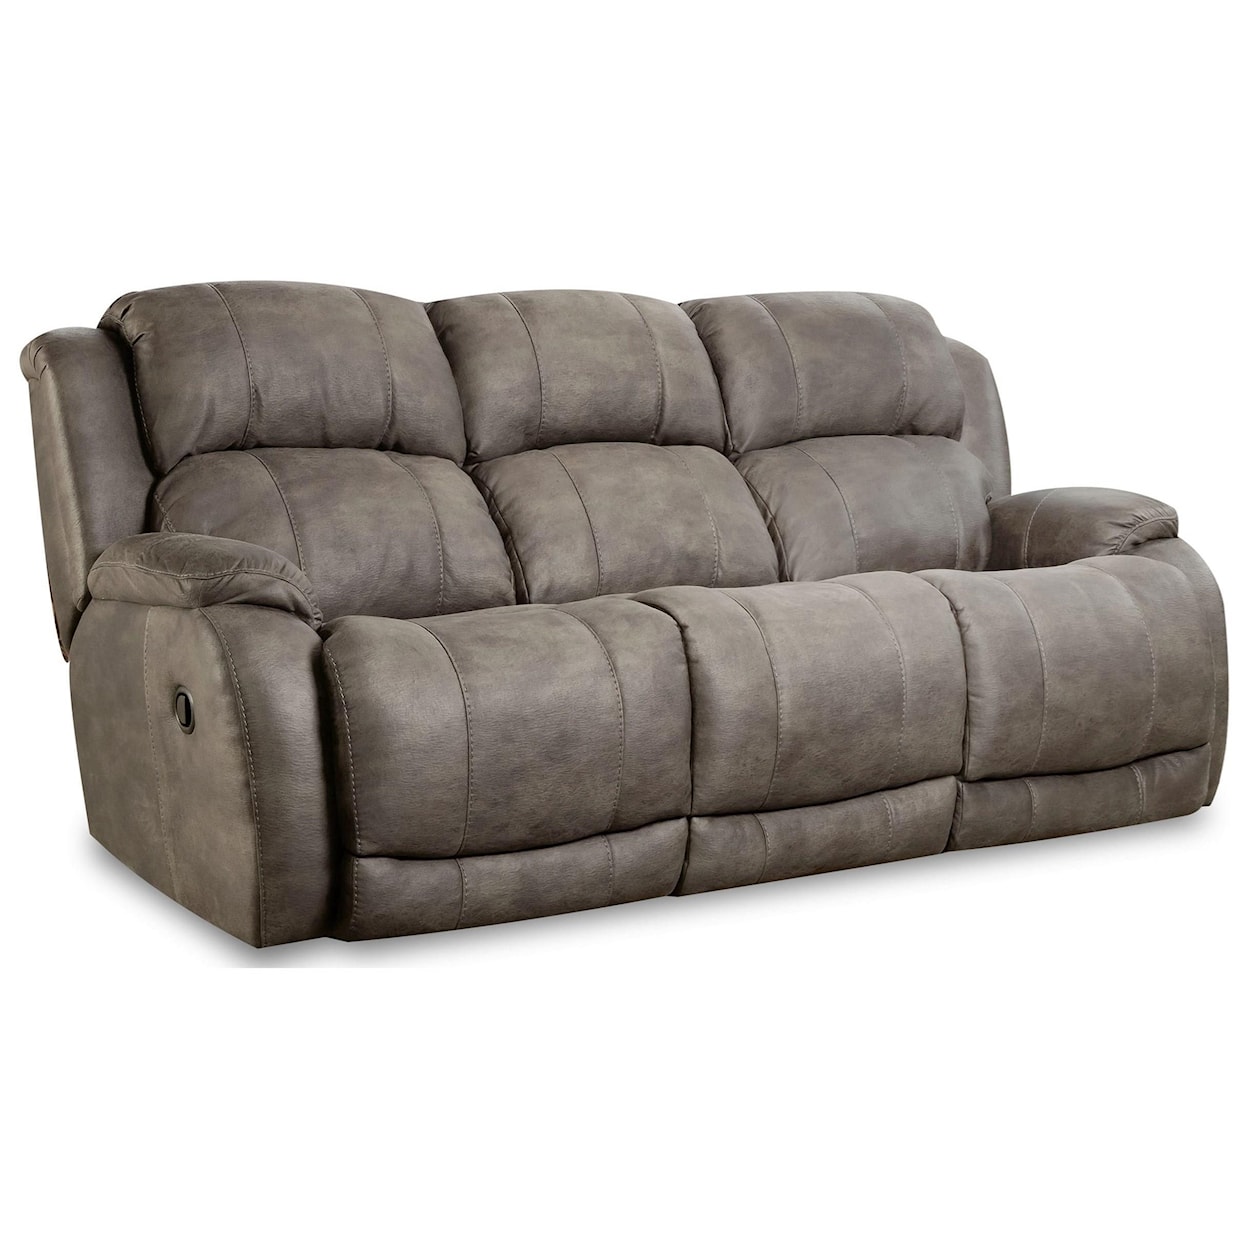 Homestretch 177 21031010100400 Casual Dual Reclining Sofa Coconis Furniture And Mattress 1st